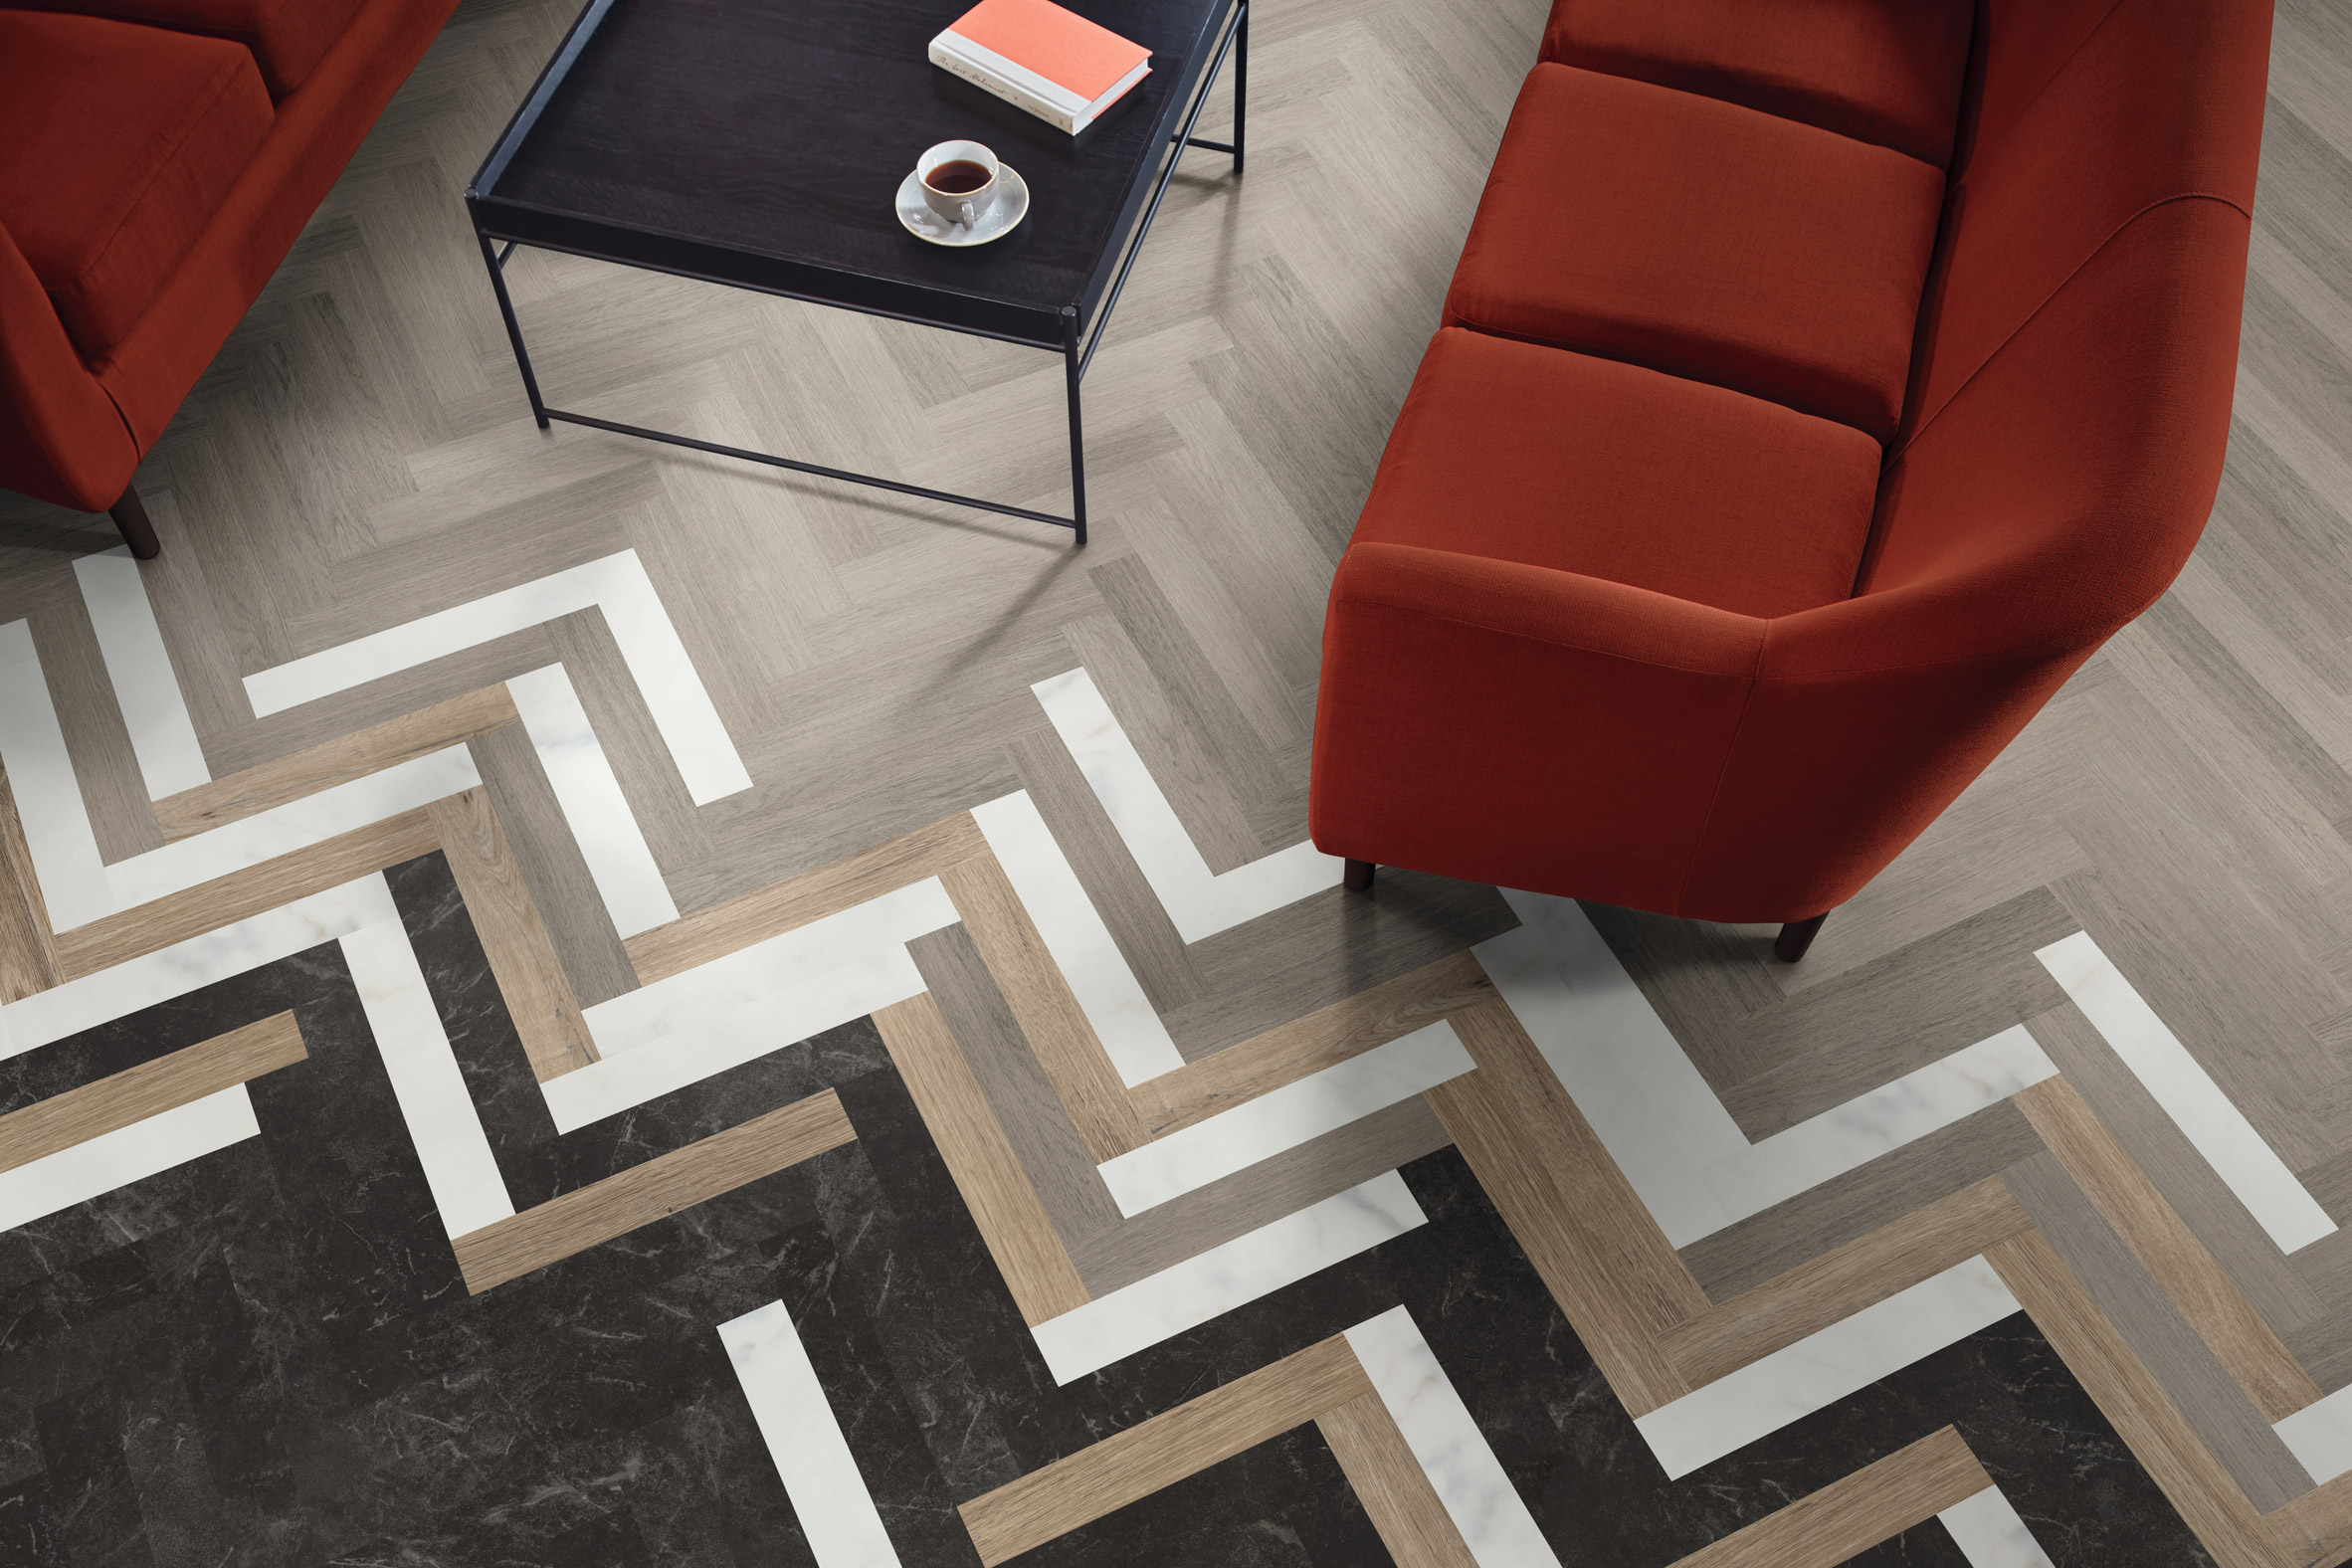 Knight Tile collection by Karndean Designflooring